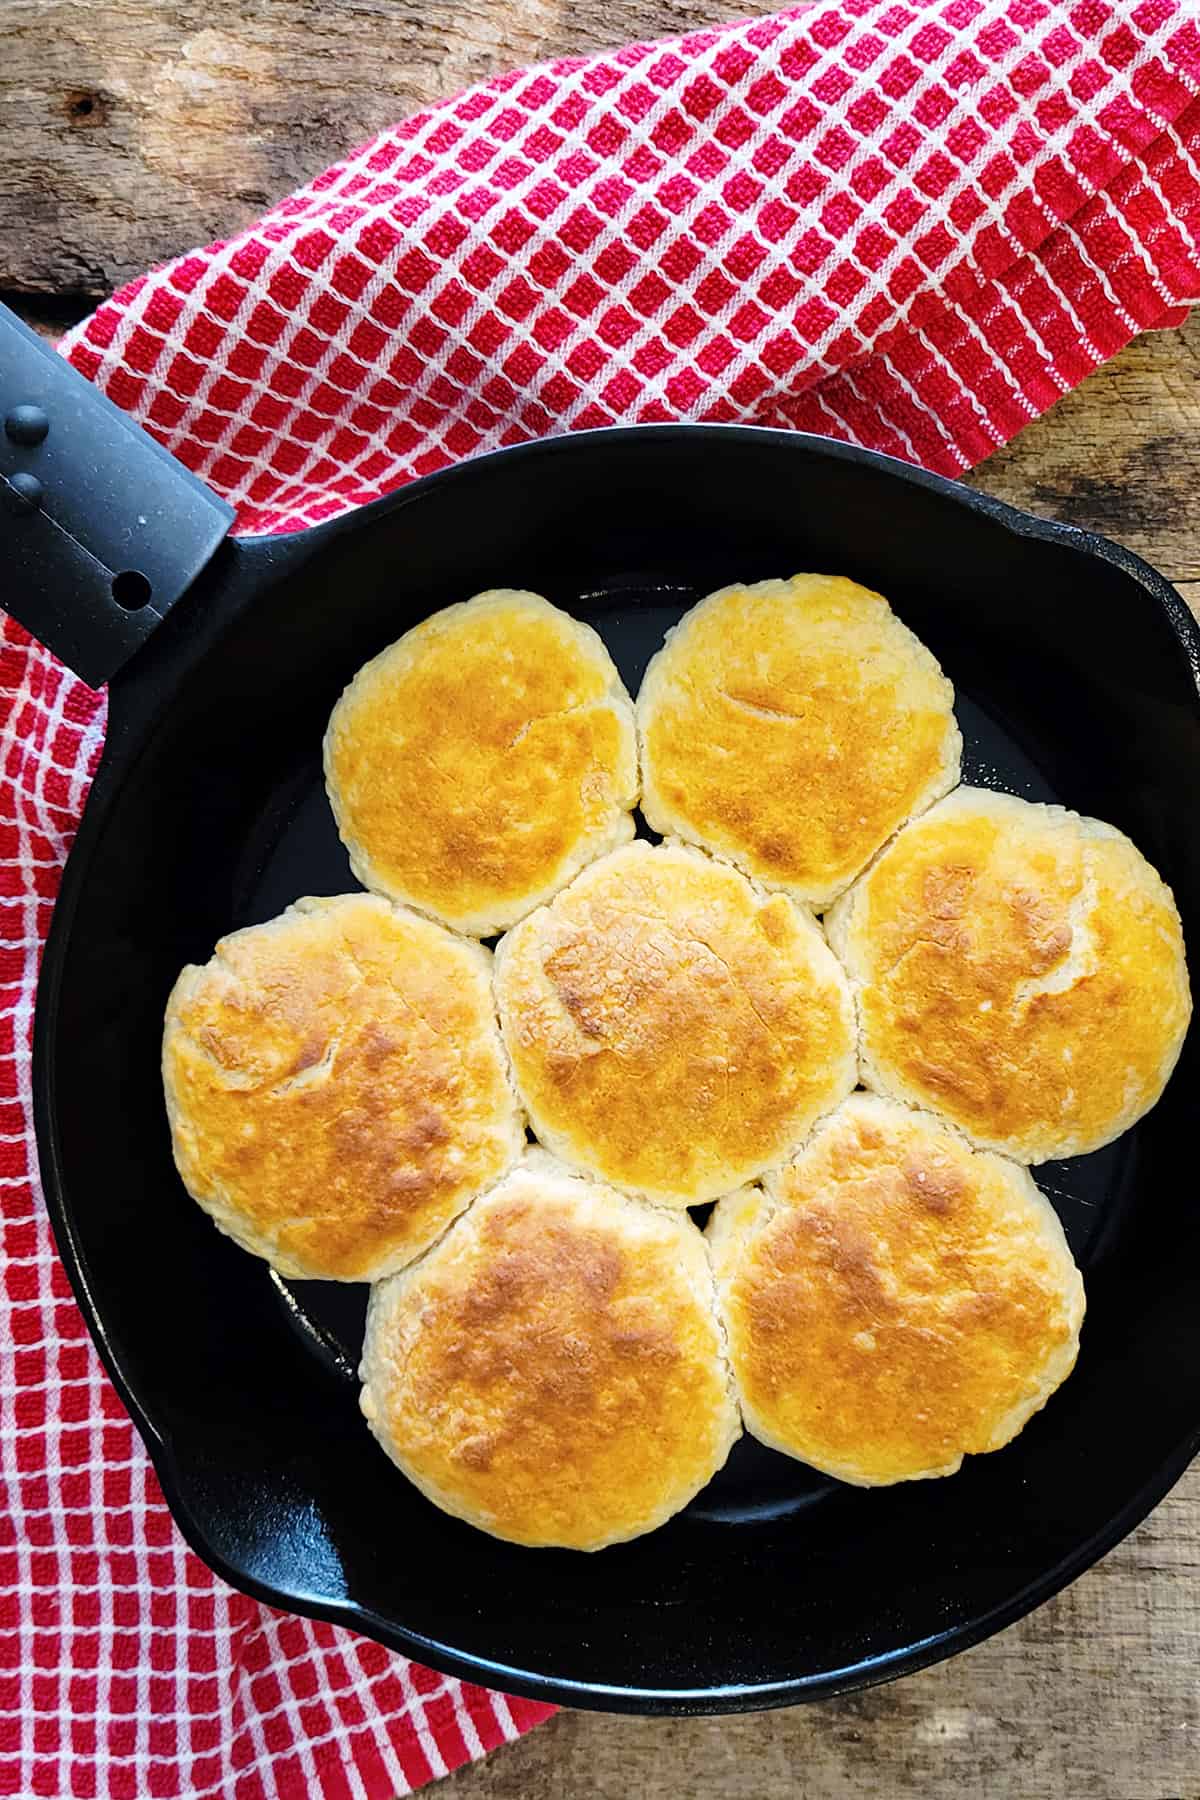 Baked buttermilk biscuits in a cast iron skillet on a wooden board.